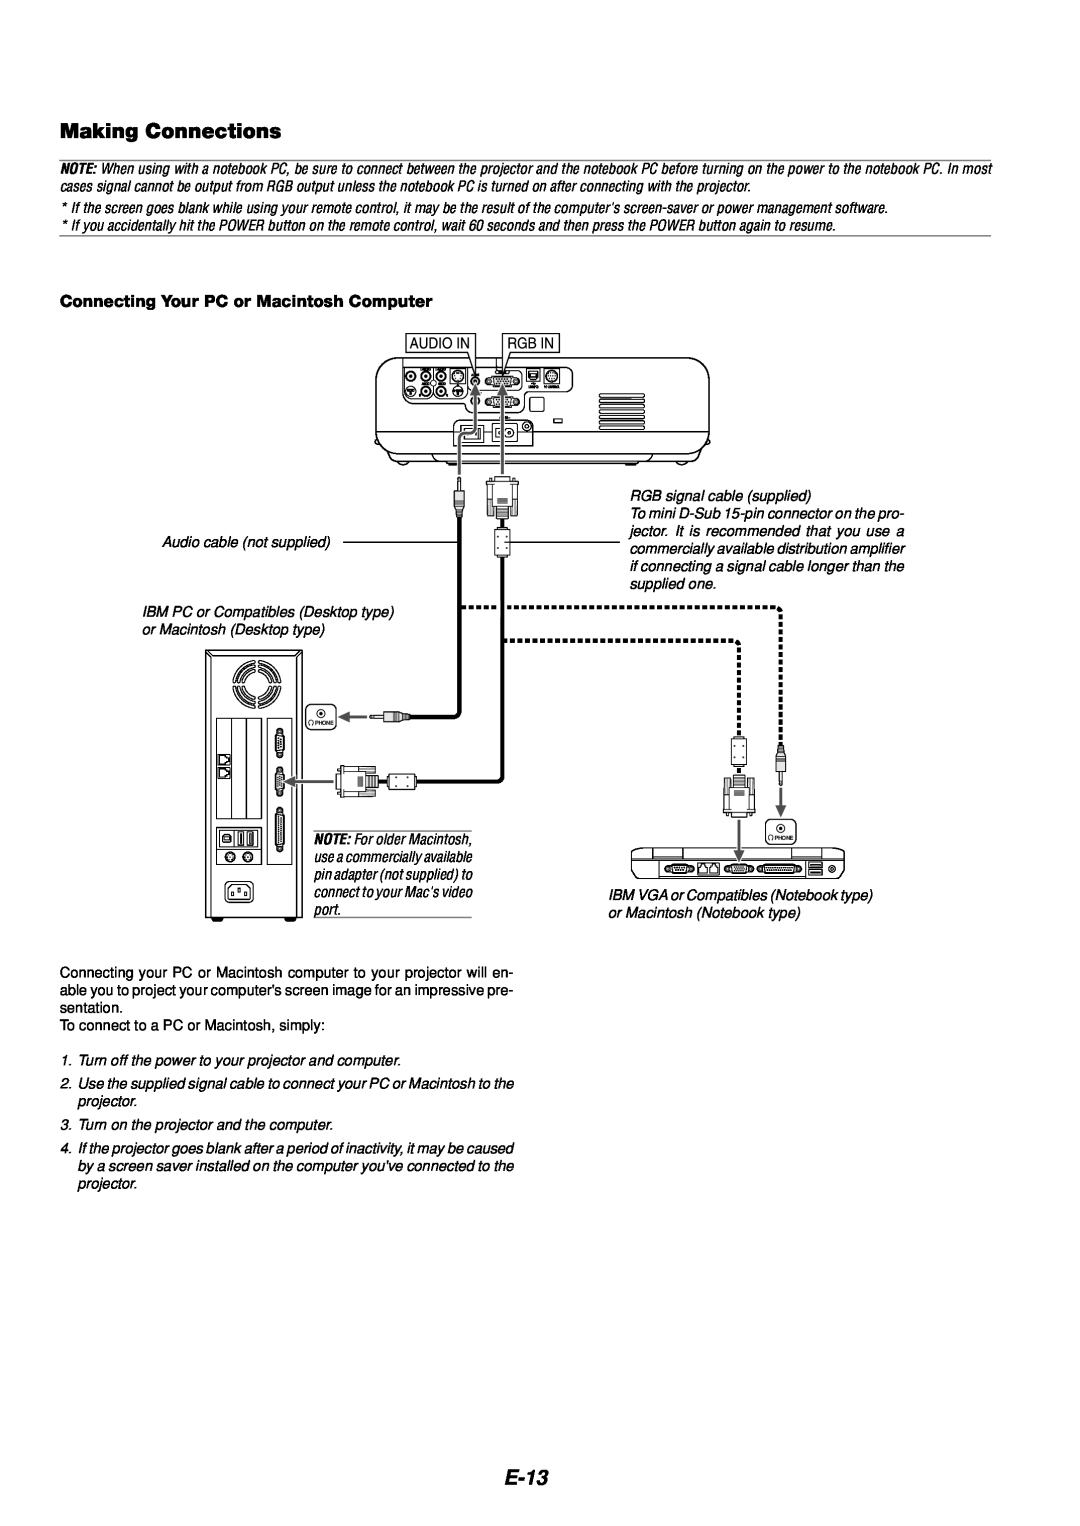 Dukane 8766 manual Making Connections, E-13, Connecting Your PC or Macintosh Computer 